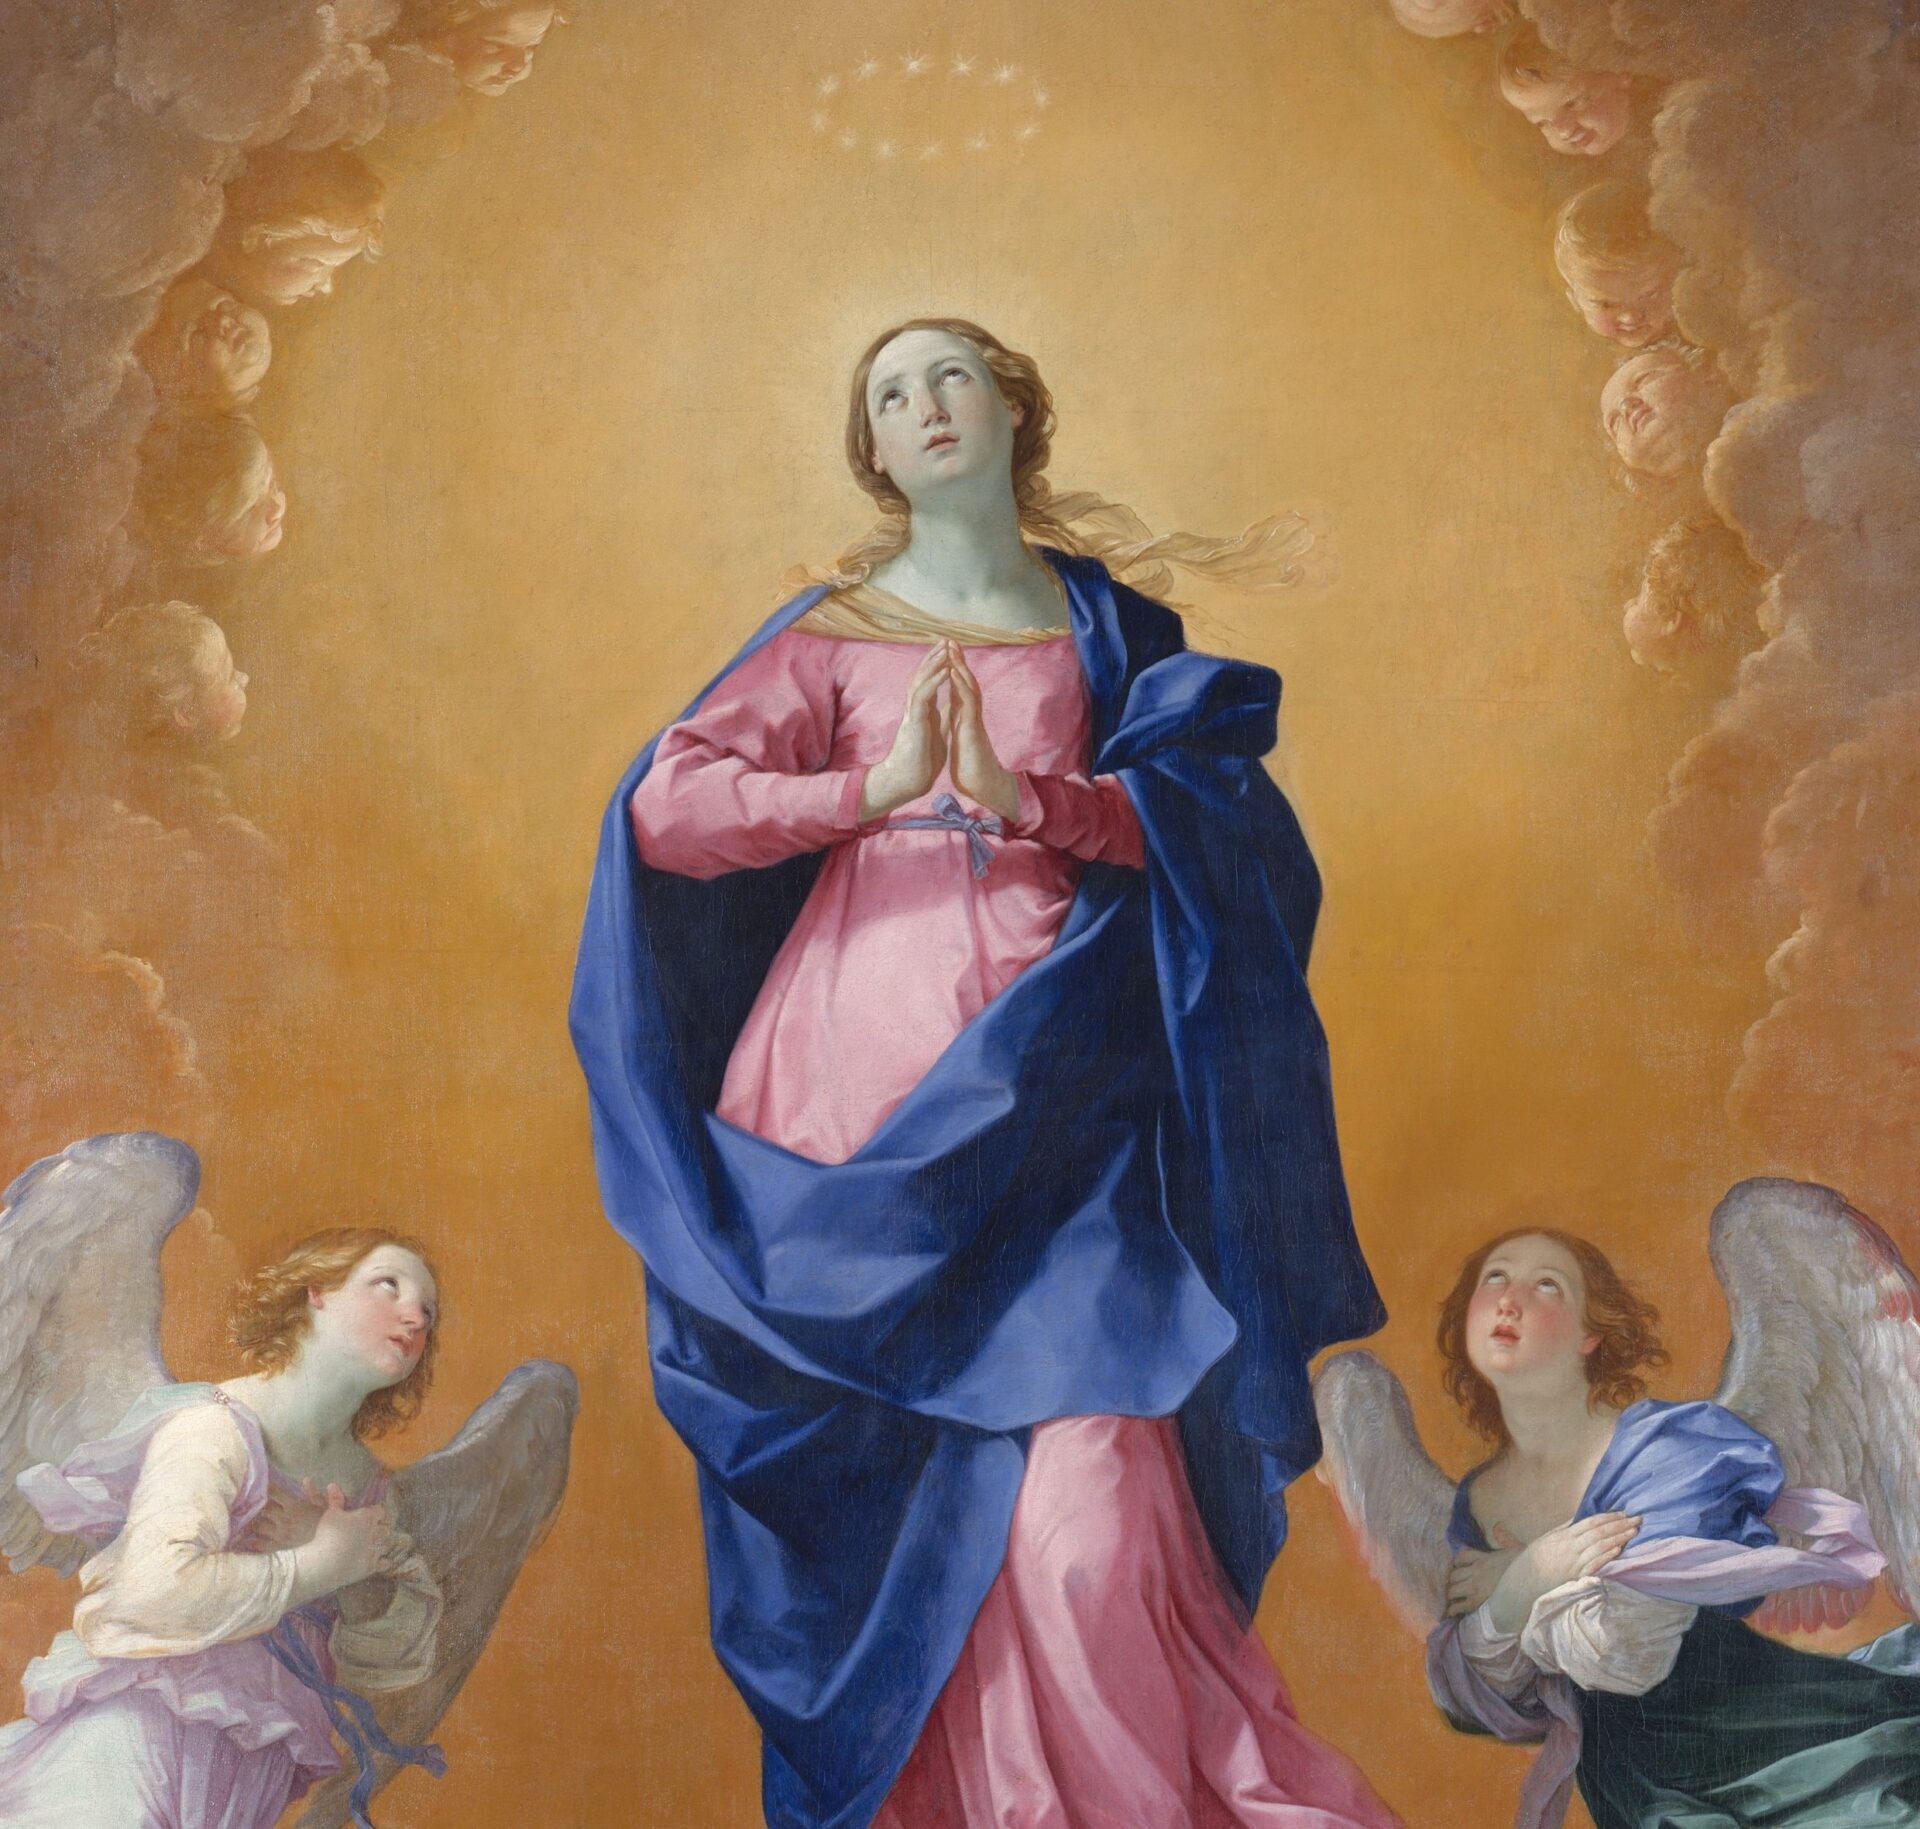 Looking ahead to the Immaculate Conception (December 8)